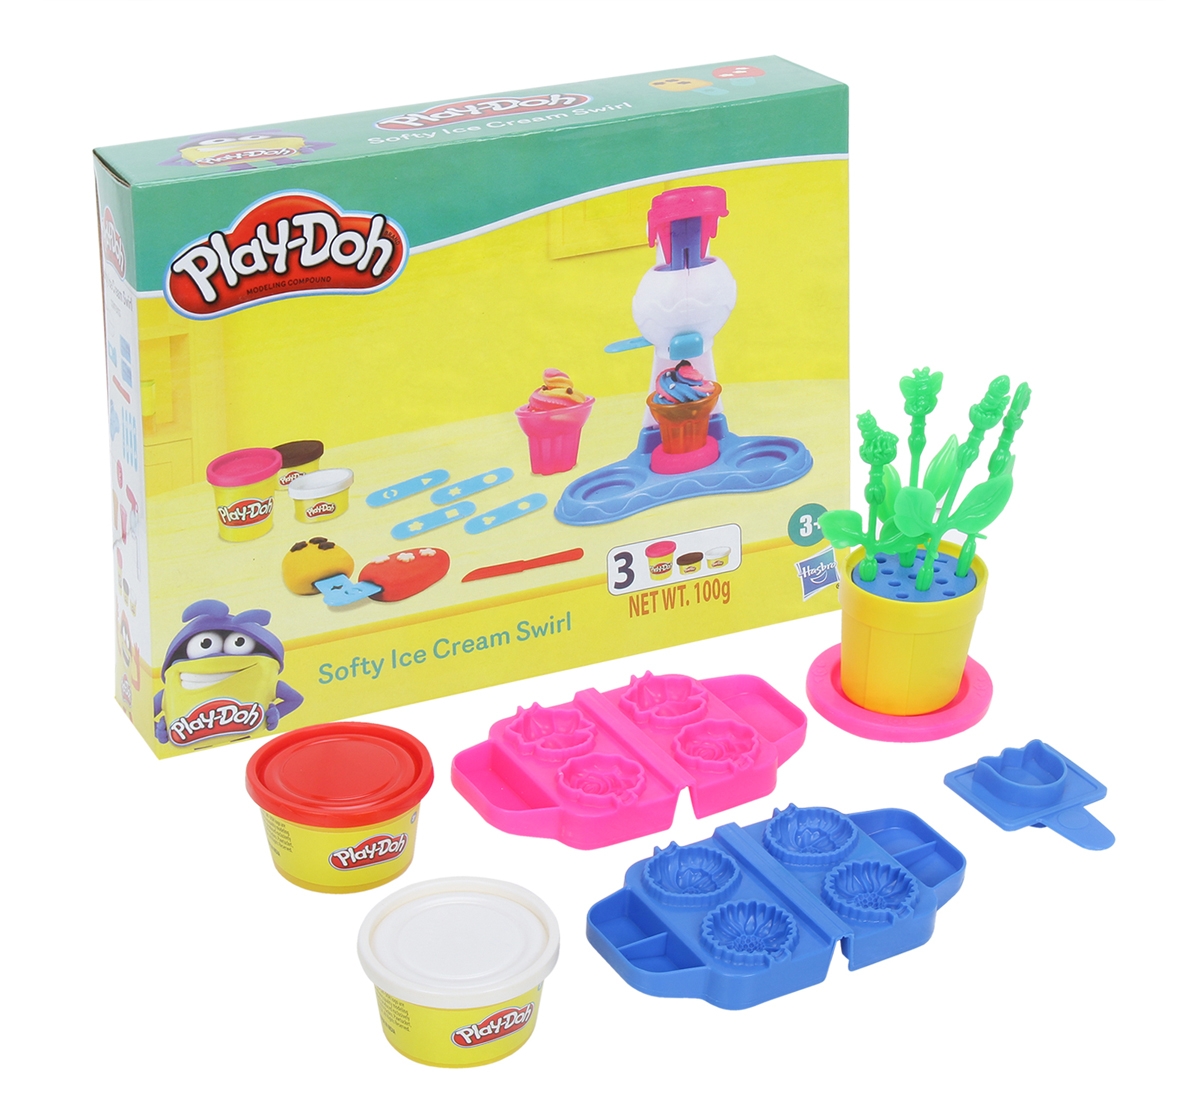 Play-Doh | Play Doh Rose Garden Playset for Kids 3Y+, Multicoloyr